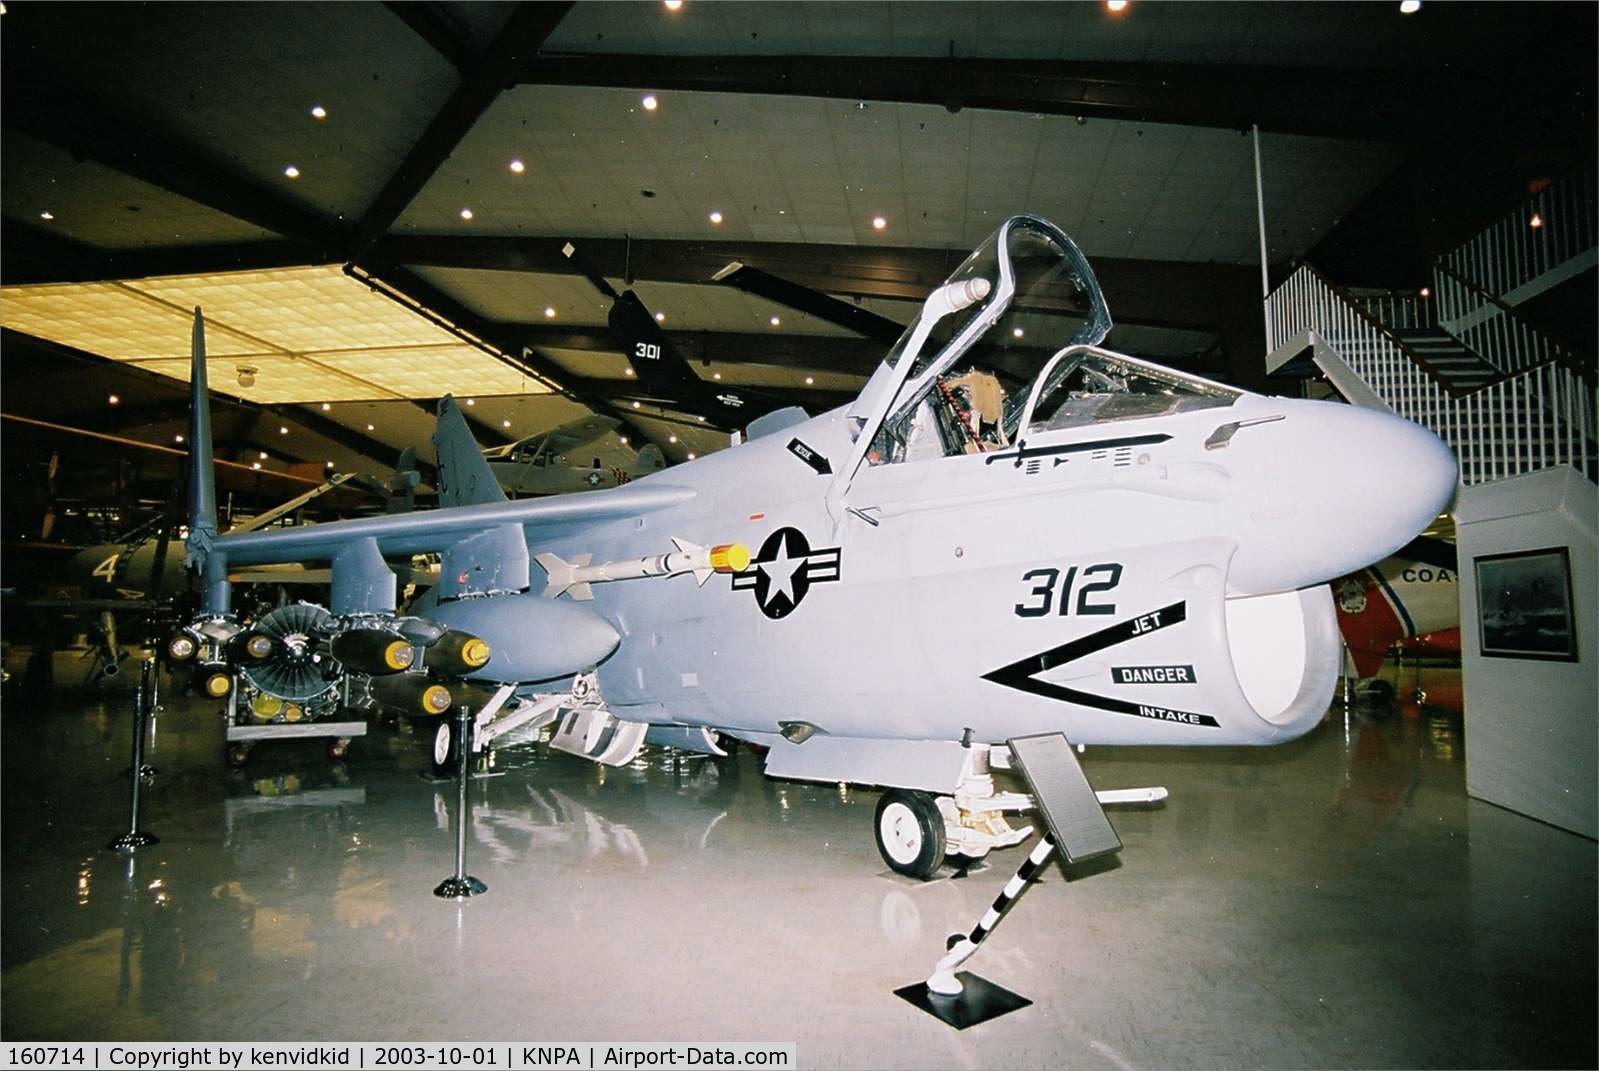 160714, LTV A-7E Corsair II C/N E-547, On display at the Museum of Naval Aviation, Pensacola.